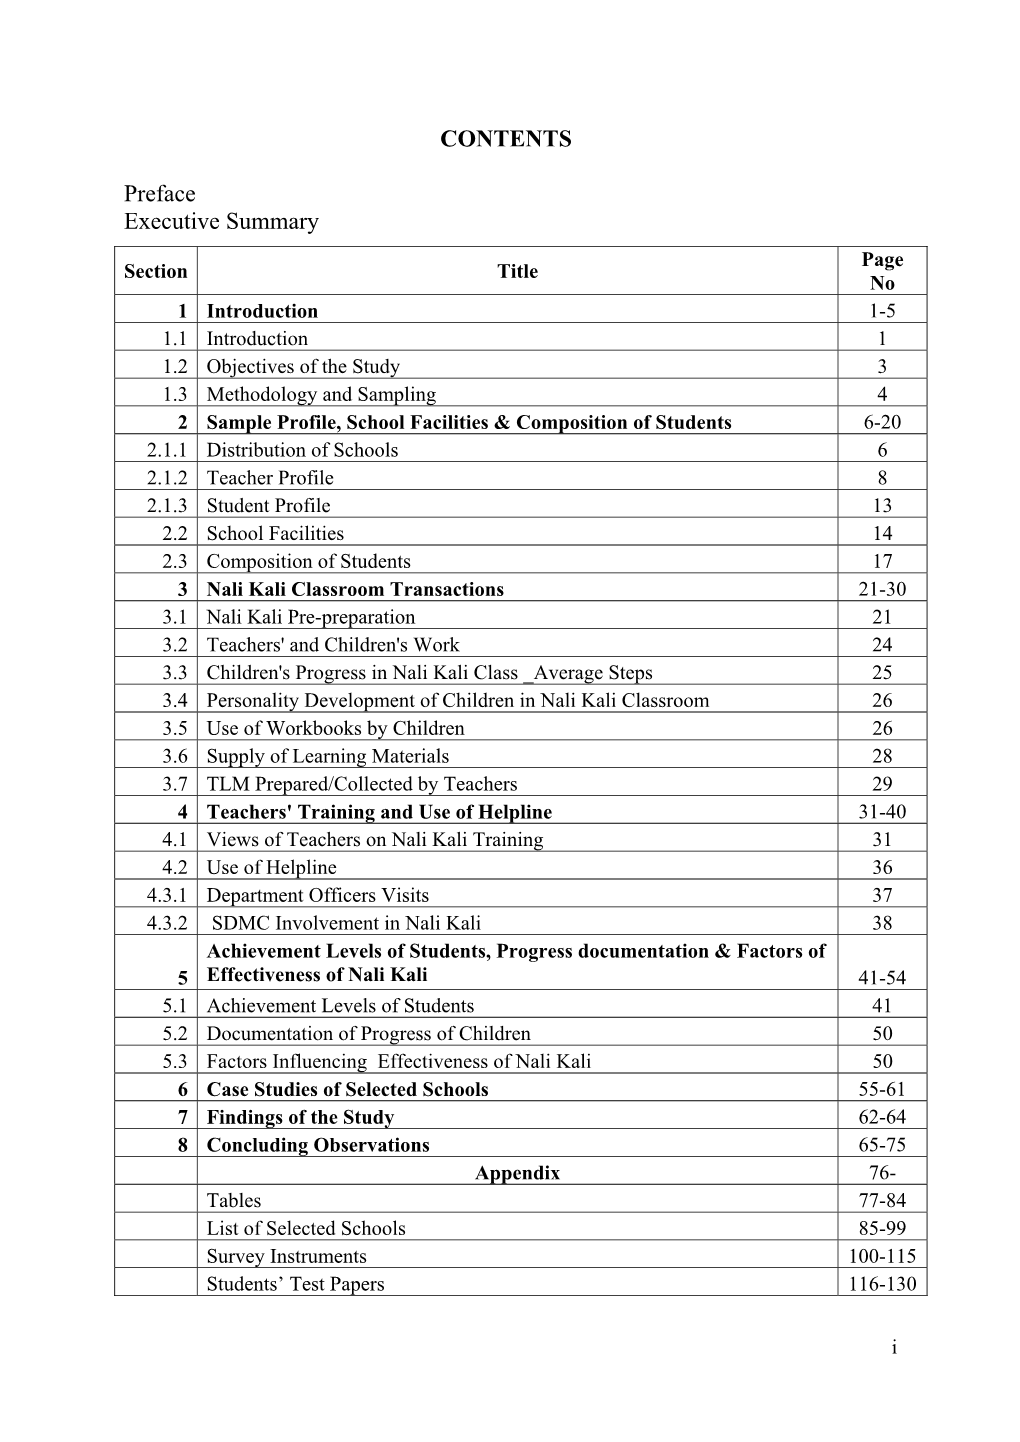 3.3 Collection of Nali Kali Teaching Materials in Sample Schools (% of Schools)